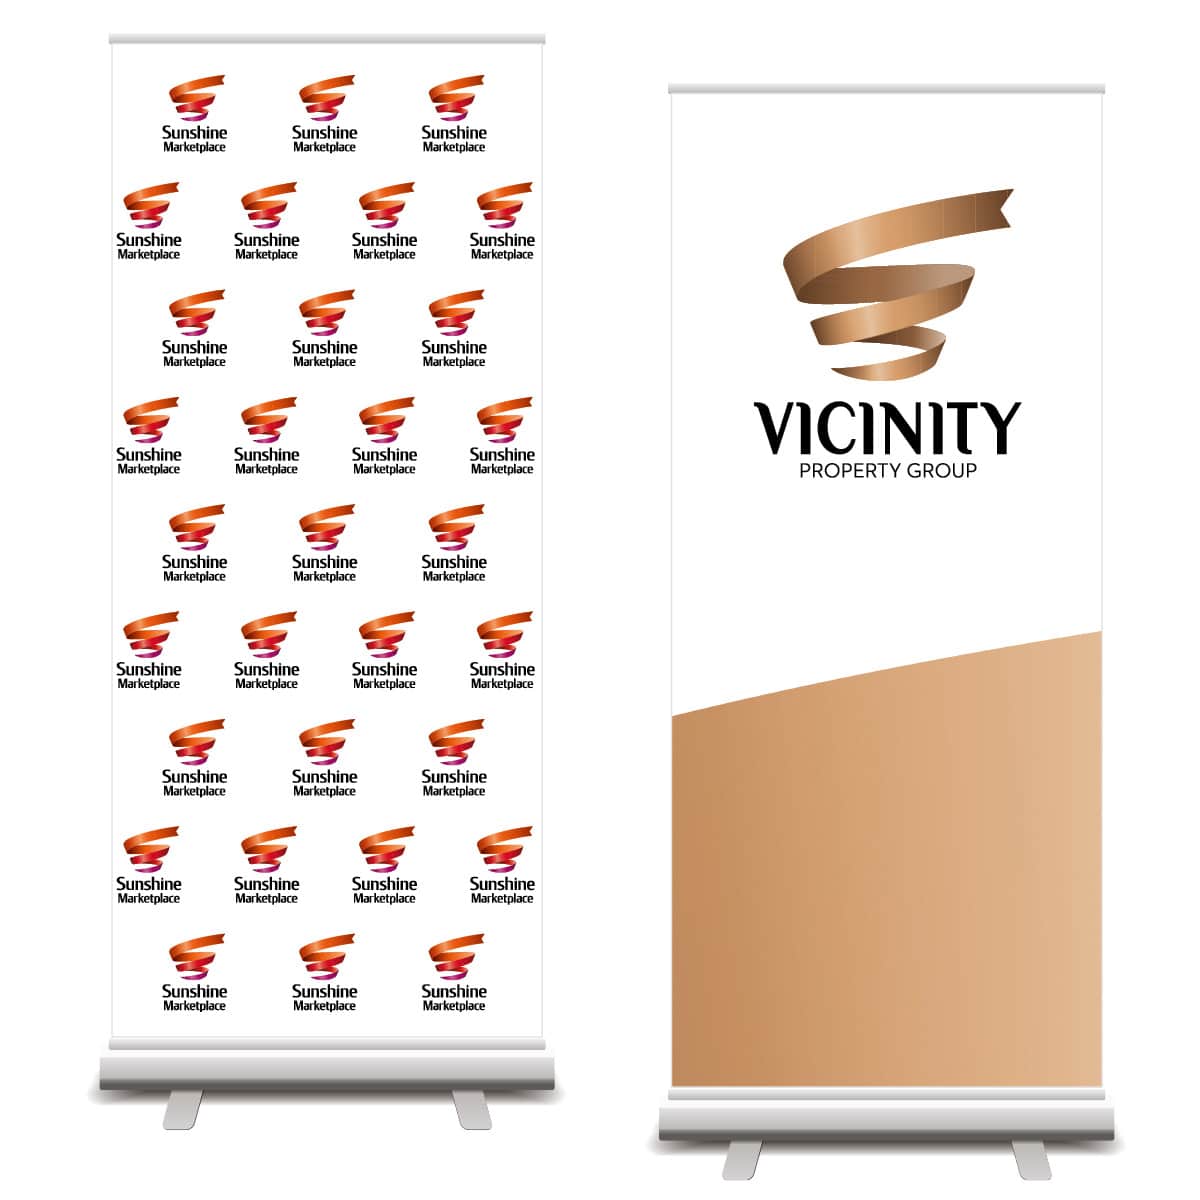 Intertype publish and print provide great looking pull up banners